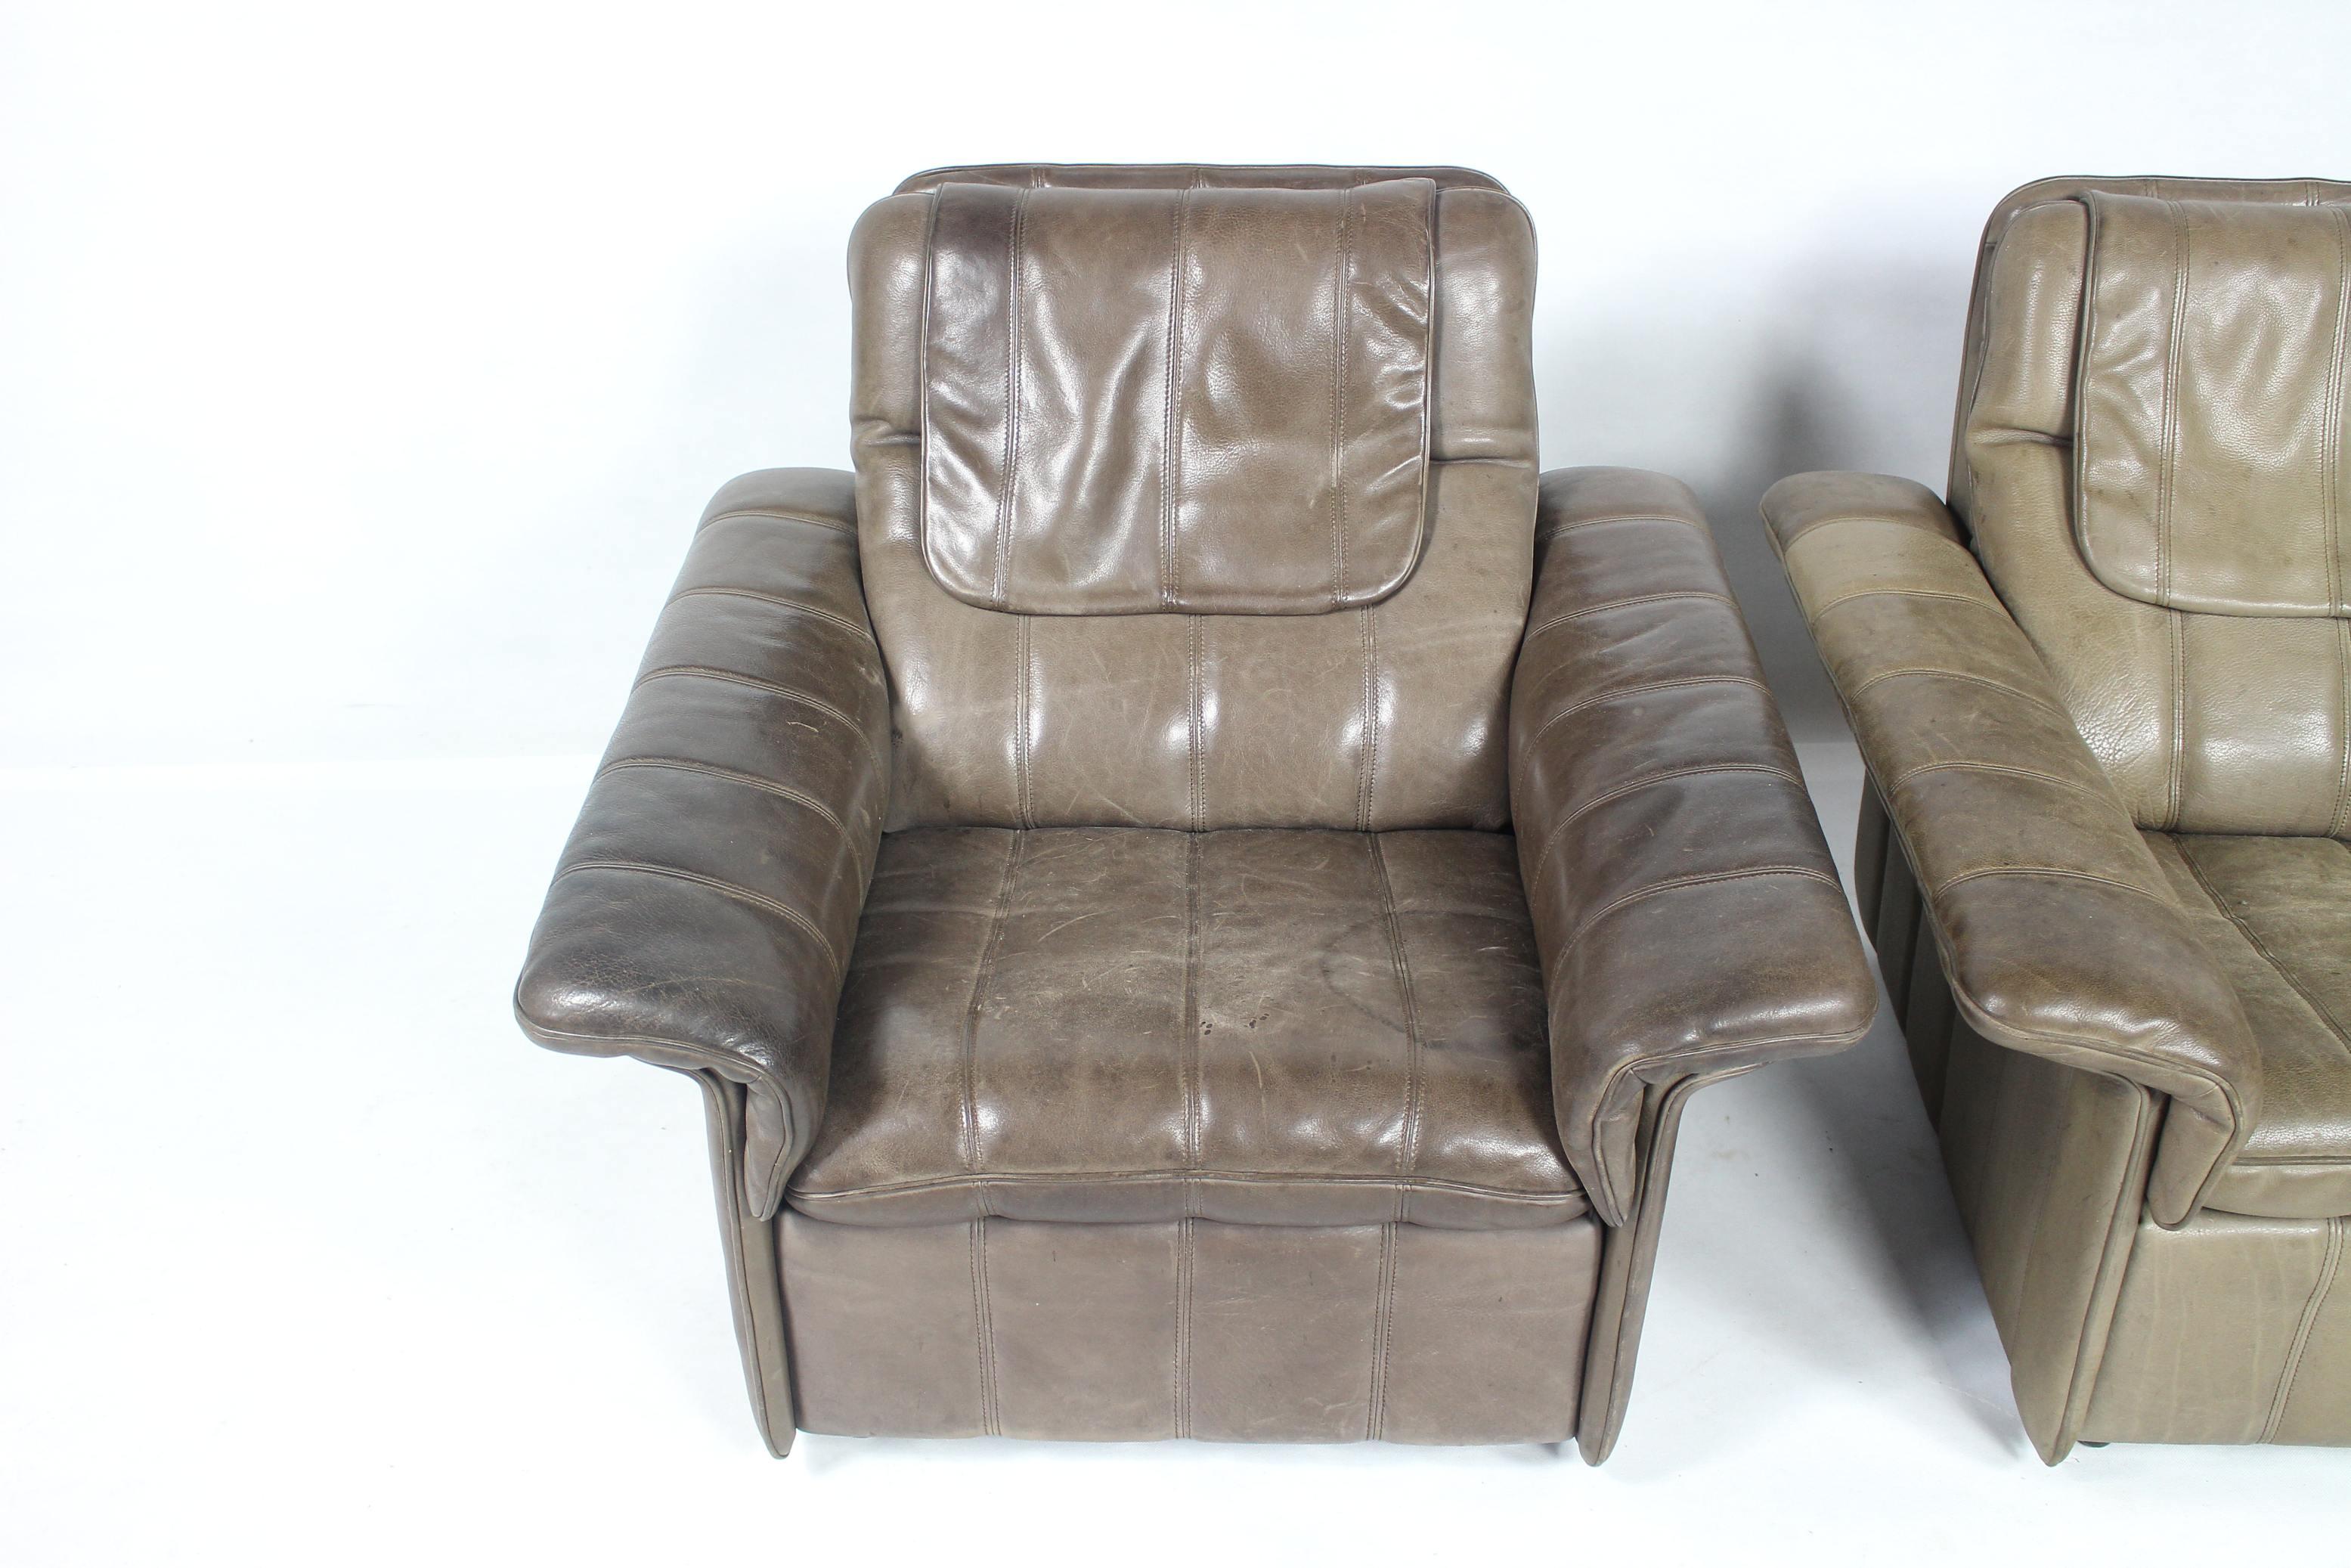 Mid-Century Modern Buffalo Leather Lounge Chair by De Sede of Switzerland, 1970s For Sale